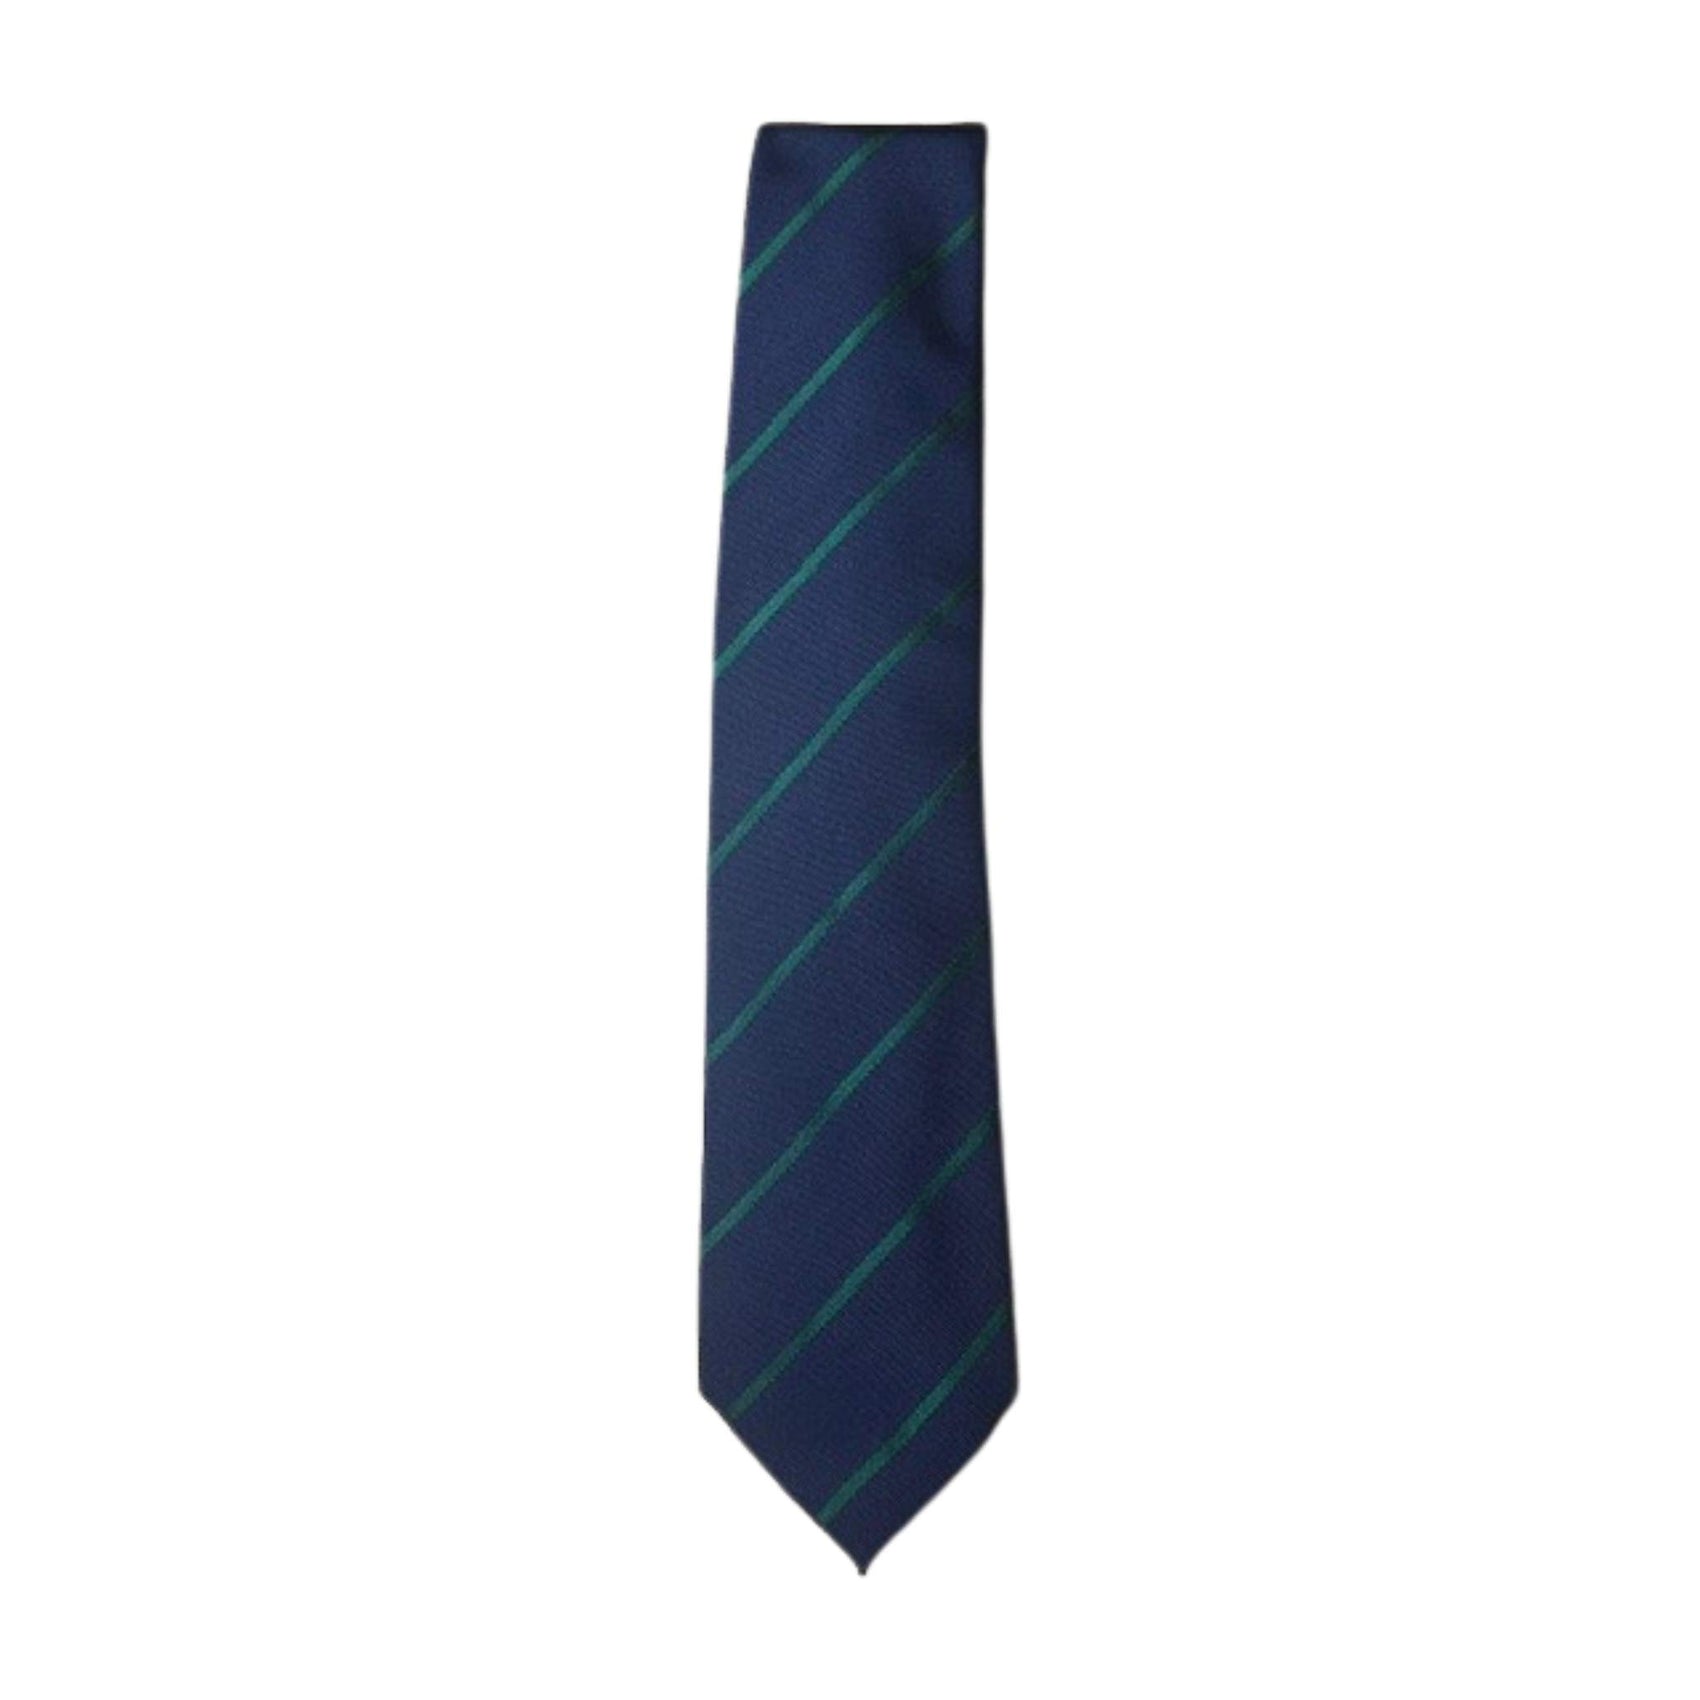 Navy and Green stripe tie